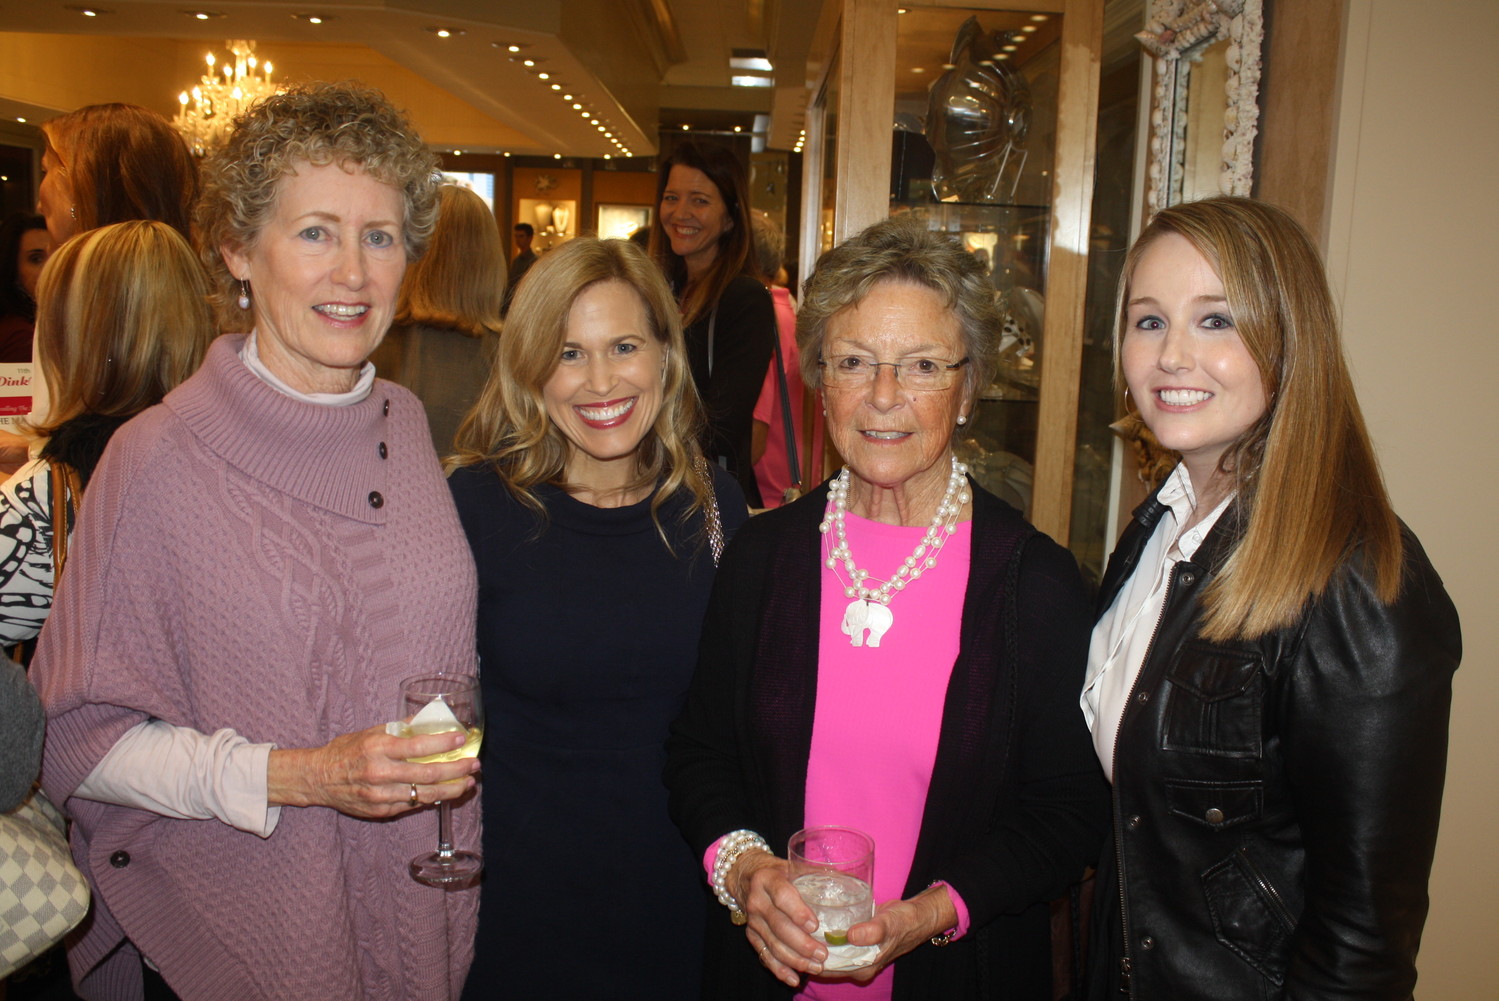 Kathie Seabrook, Dr. Dawn Mussallem, Susie Buckey and Jackie Joy gather at the event.